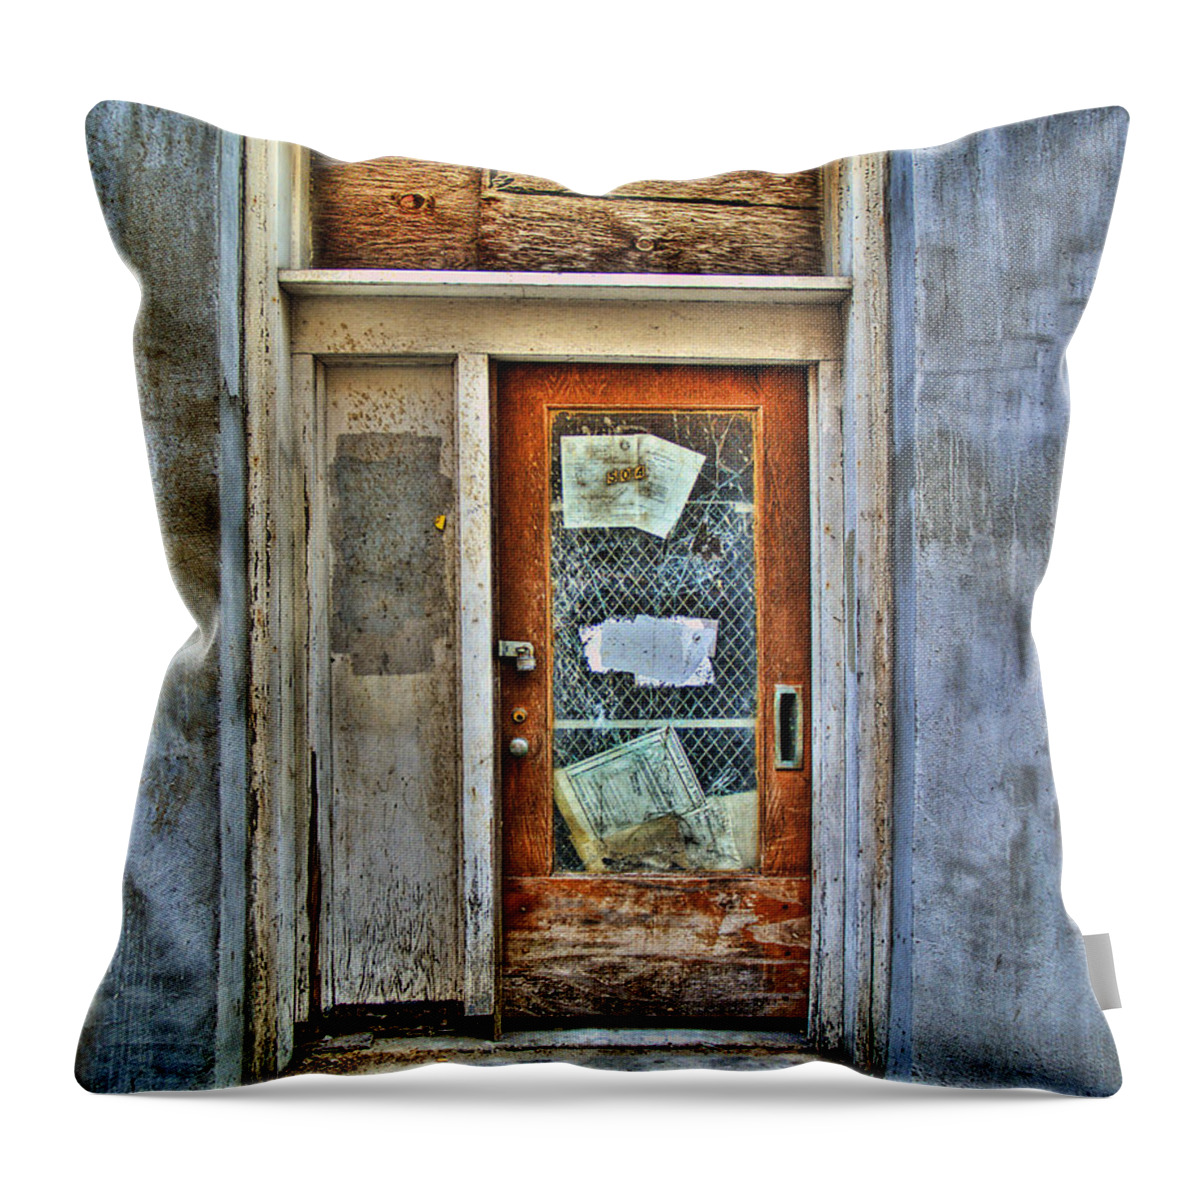 New Orleans Throw Pillow featuring the photograph New Orleans Door by Tammy Wetzel